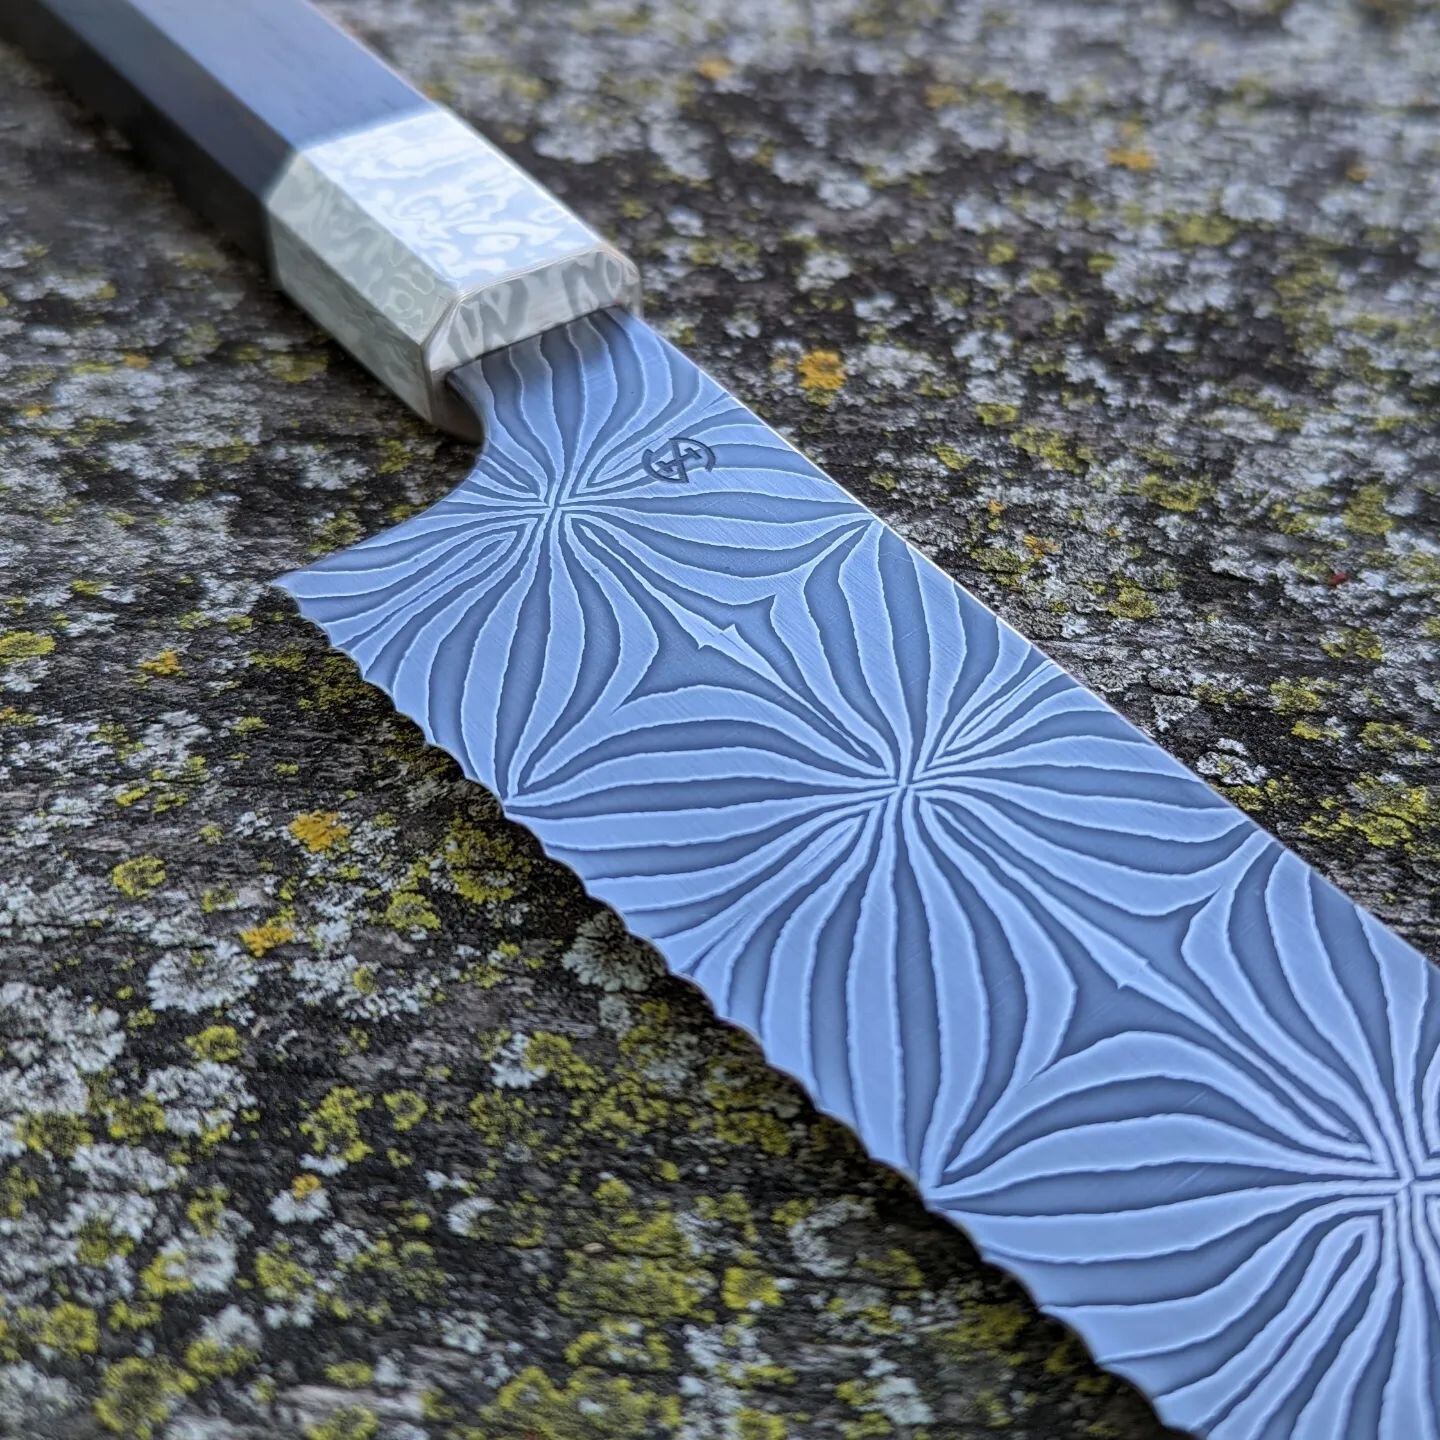 Kind of a flowery look to this pattern, hey does your mom like flowers? Oh she likes making bread also? #mothersday
.
.
.
.
.
.
.
#chefknife #kitchenknife #razorsharp #kitchentools #souschef #forged #patternwelded #cooking #chefsroll #chefsofinstagra